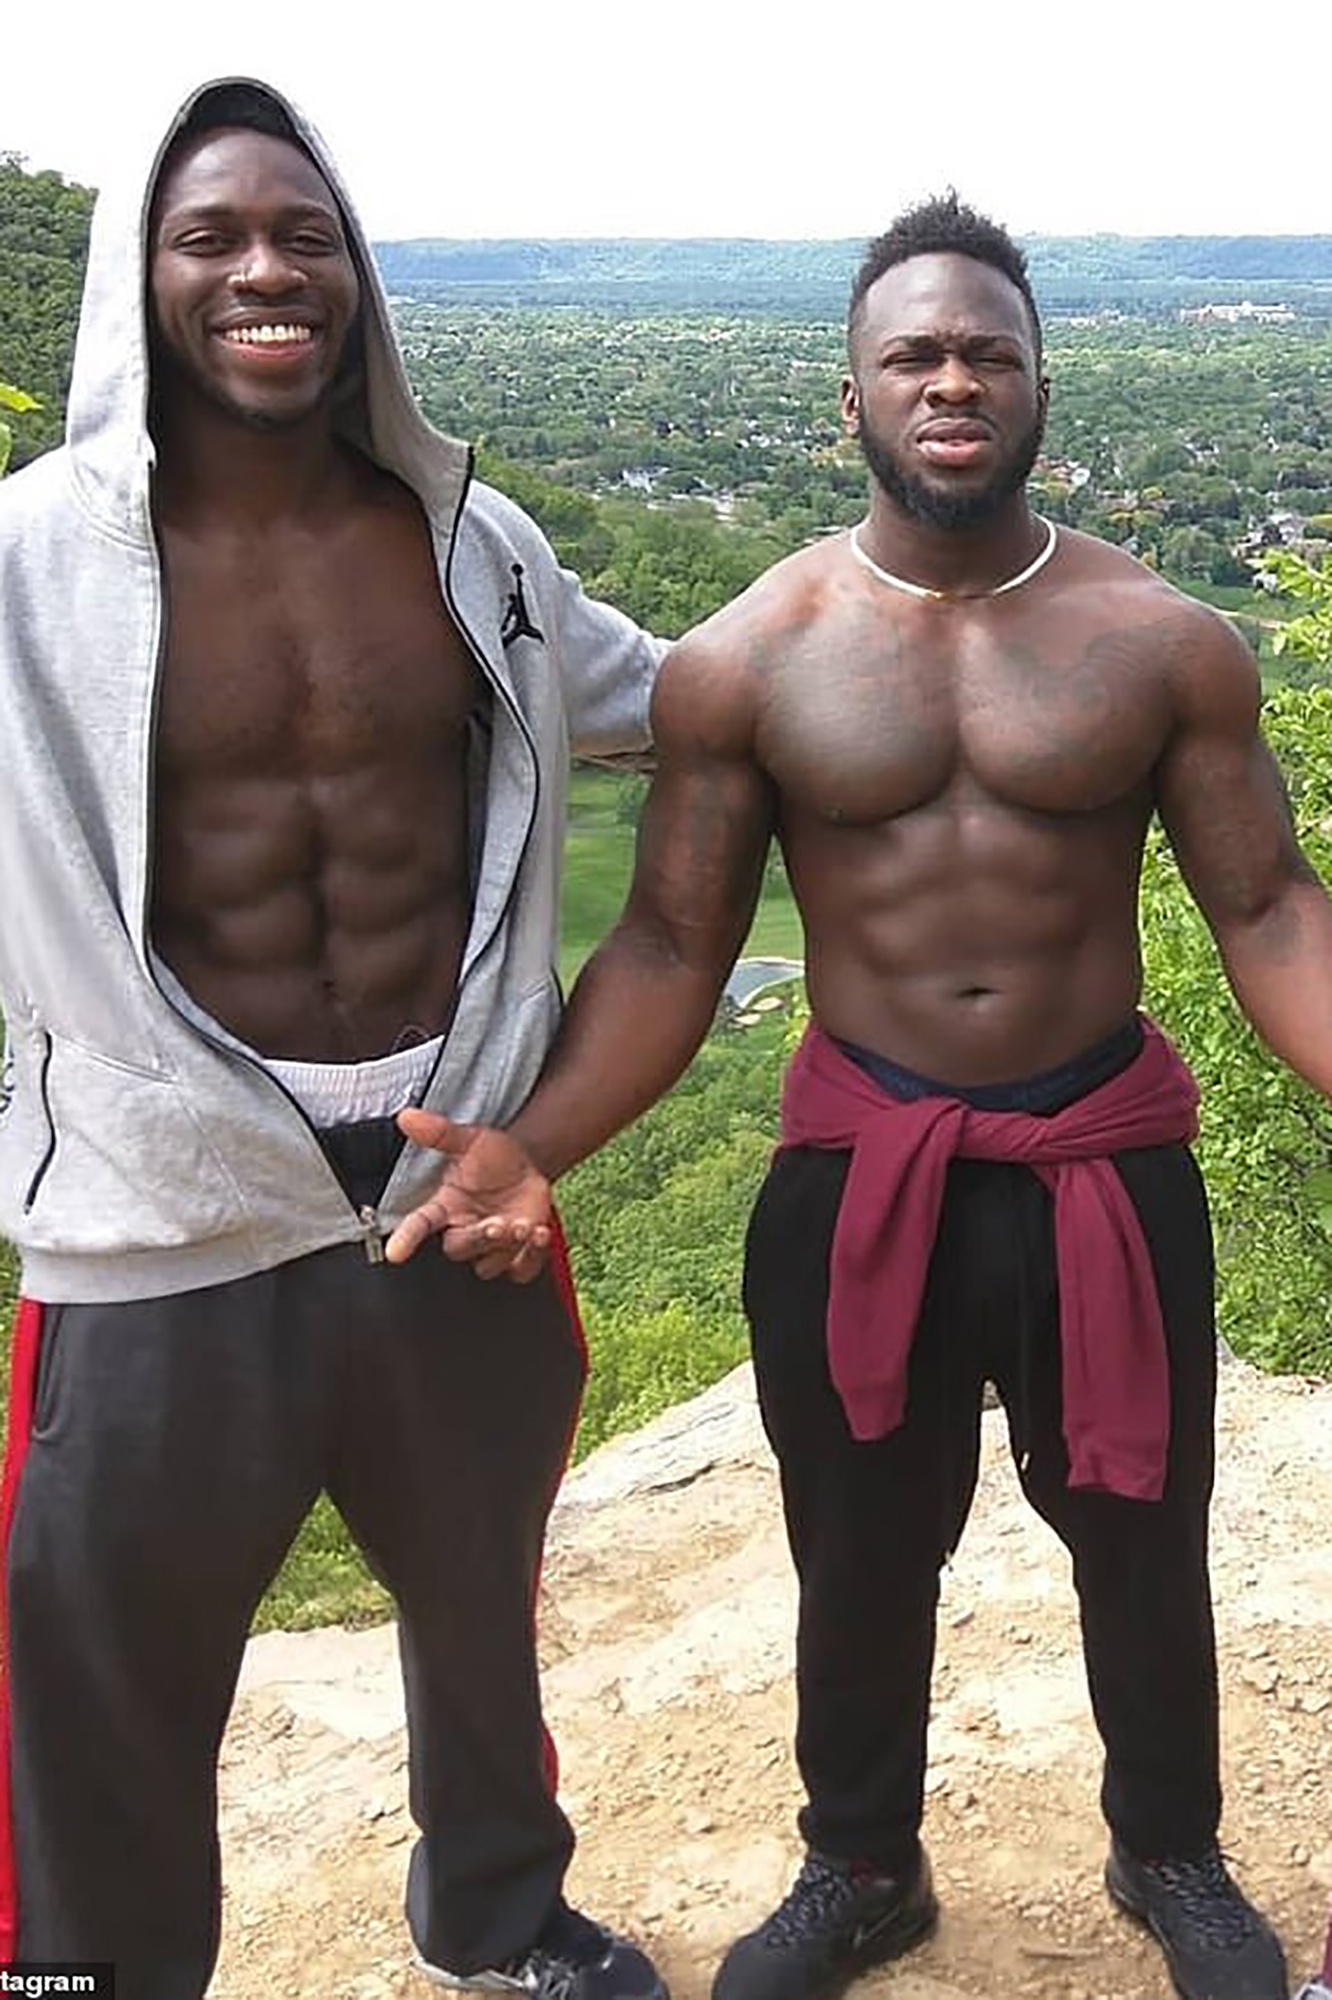 The two Nigerian brothers being questioned over the Jussie Smollett attack are actors Abimbola 'Abel' and Olabinjo 'Ola' Osundairo